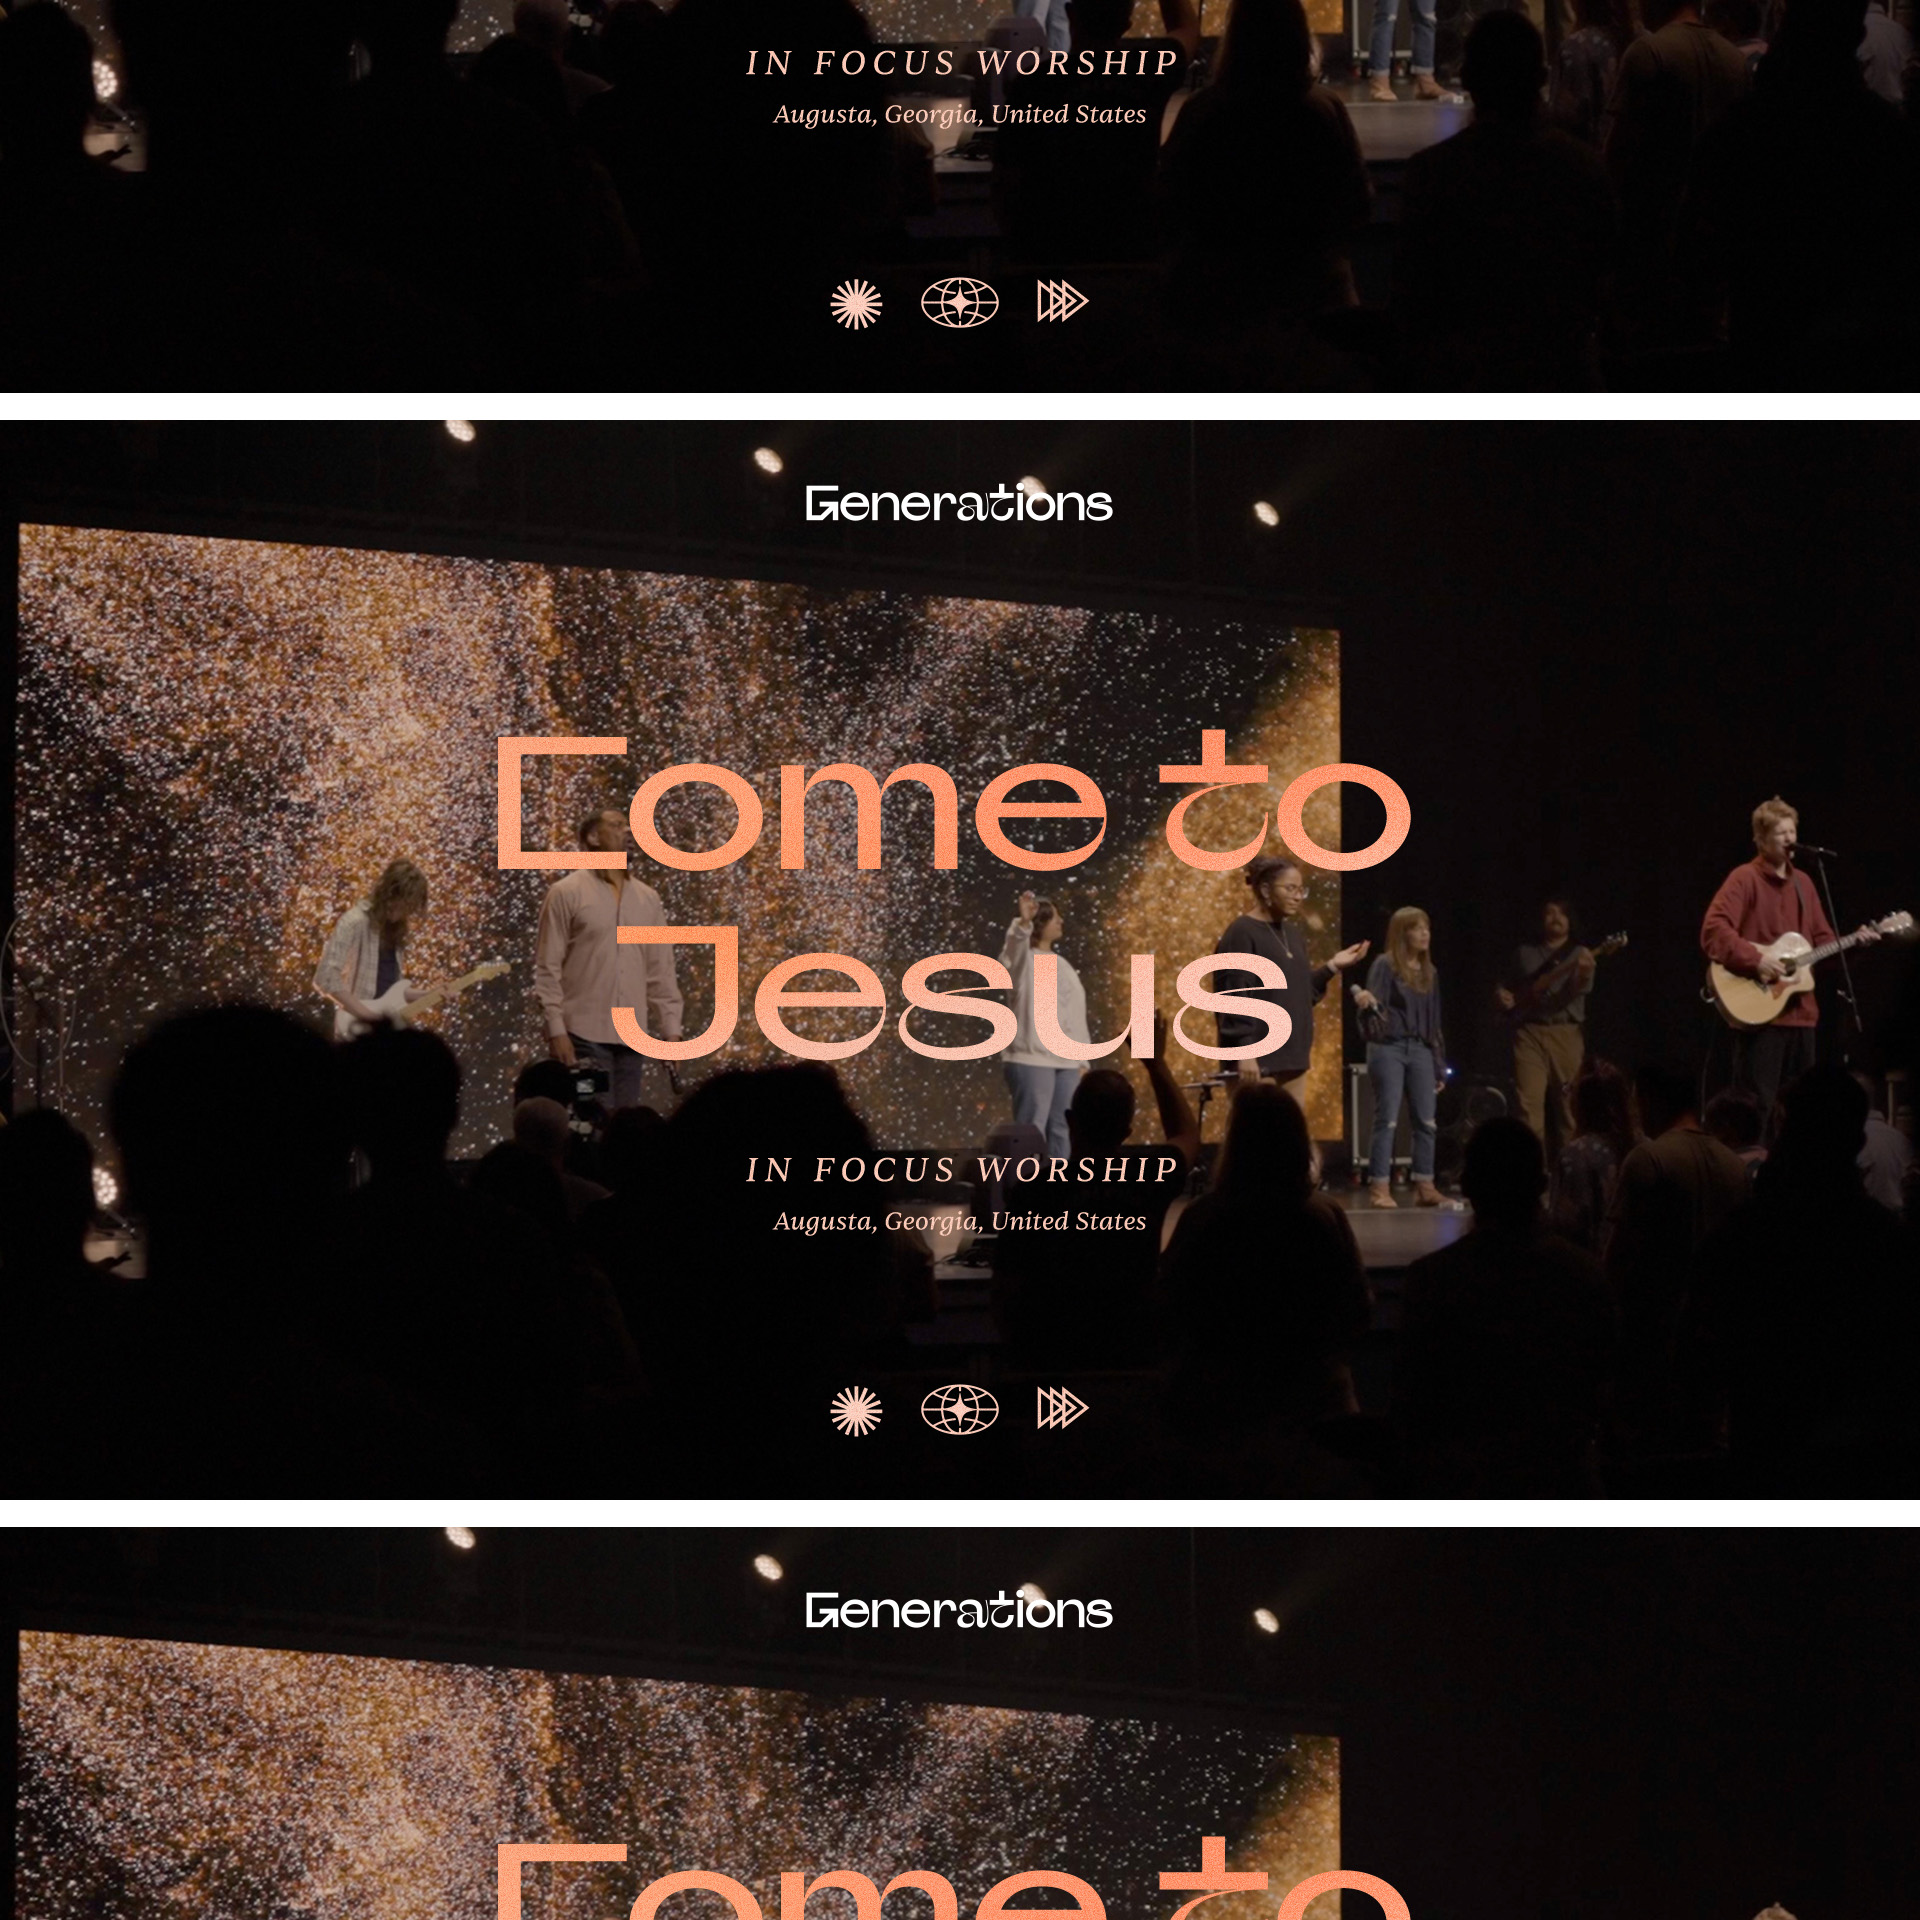 “Come to Jesus” by Every Nation Music